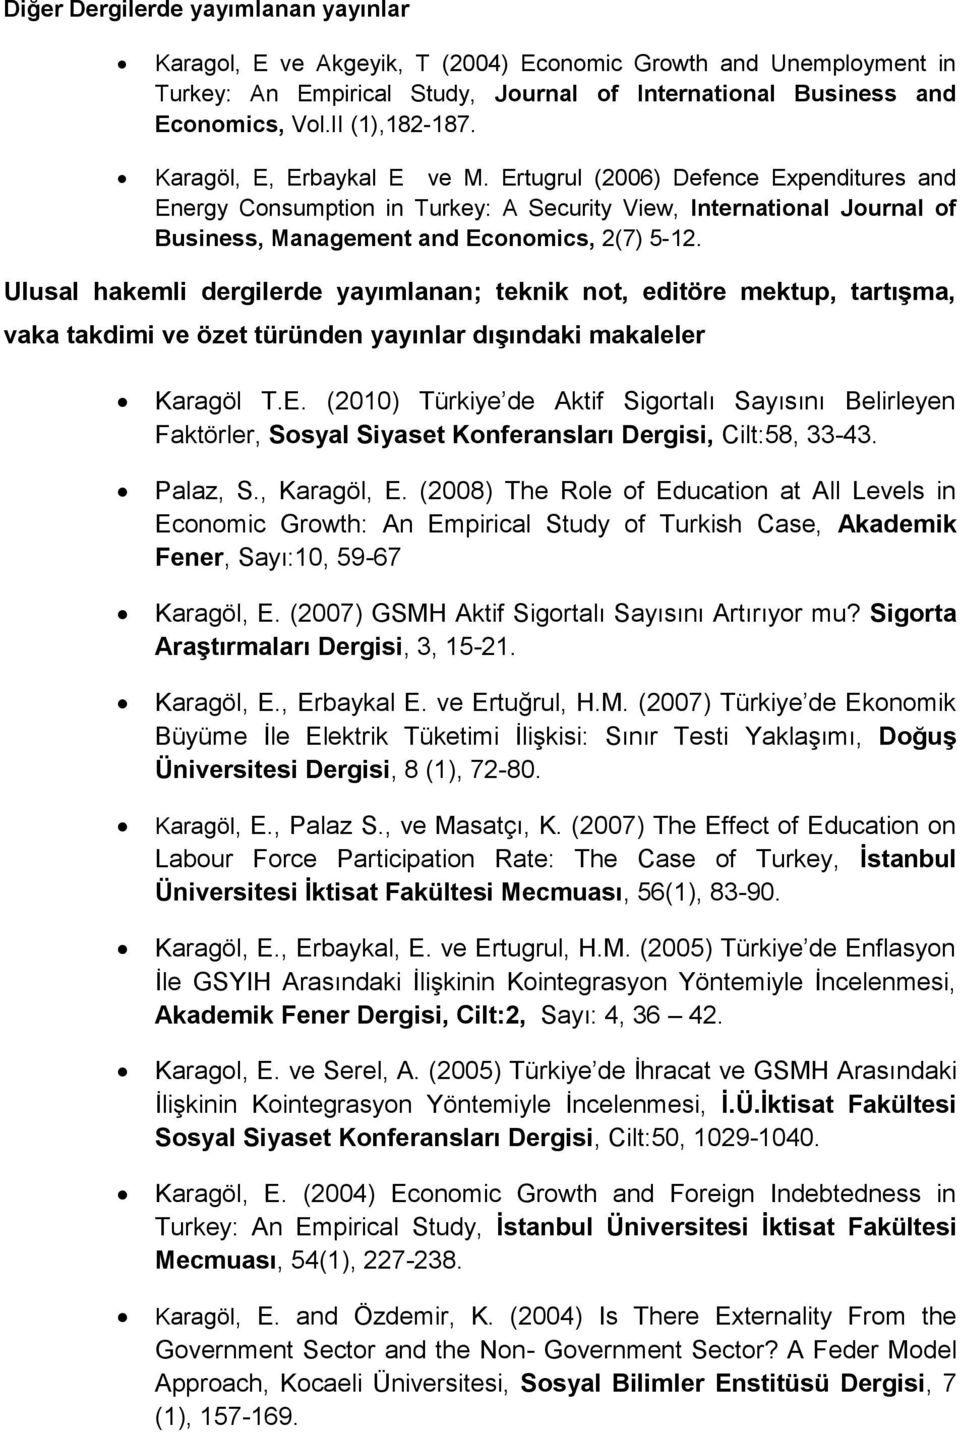 Ertugrul (2006) Defence Expenditures and Energy Consumption in Turkey: A Security View, International Journal of Business, Management and Economics, 2(7) 5-12.